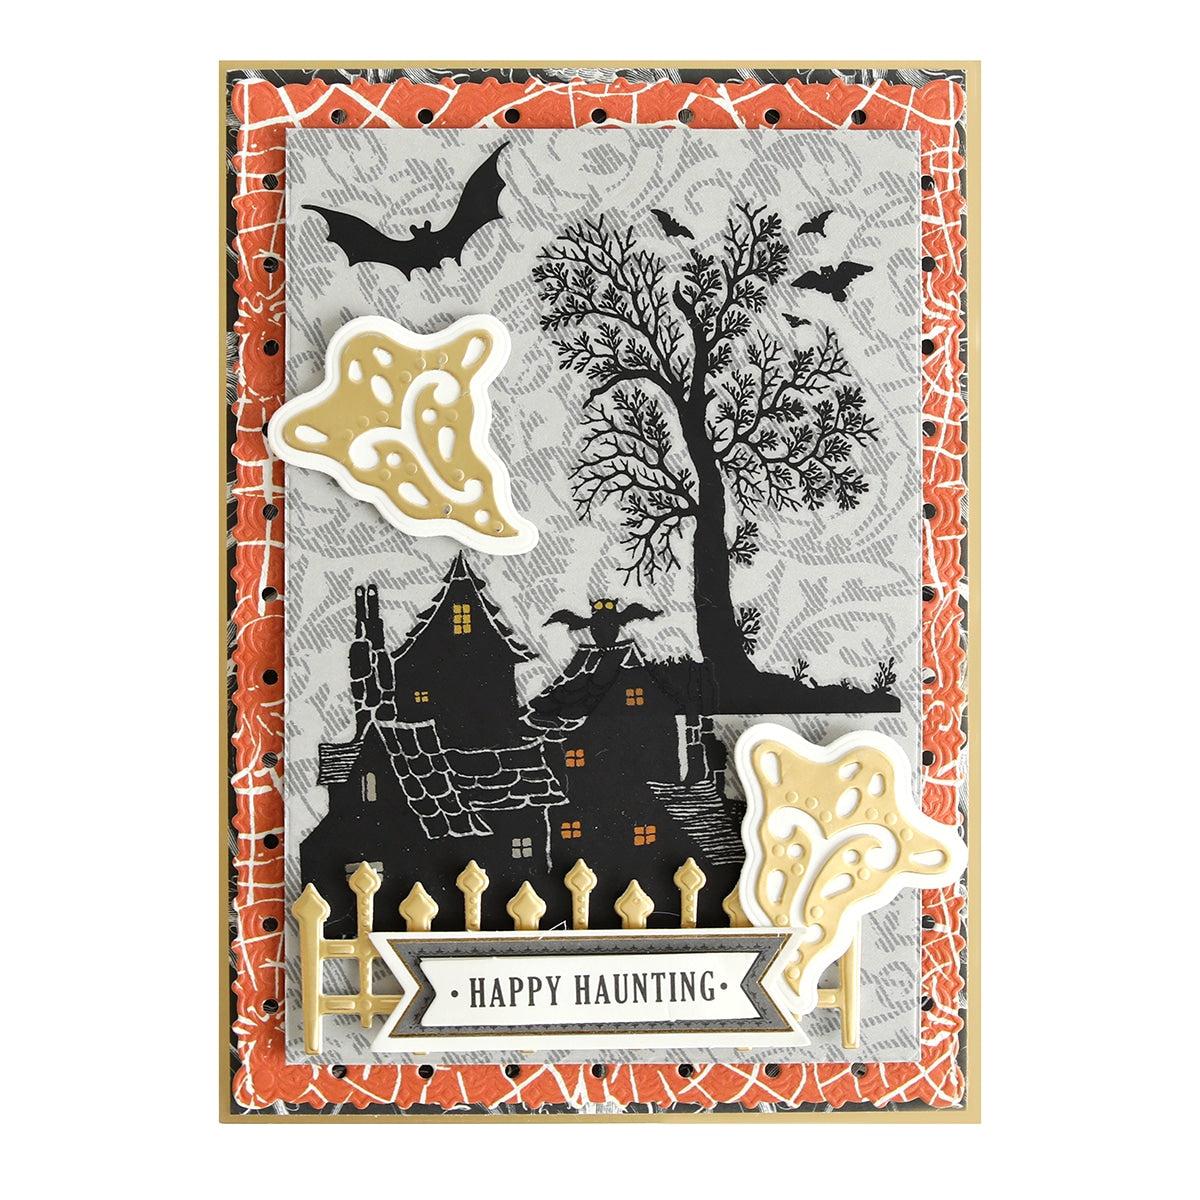 a card with a halloween scene and bats.